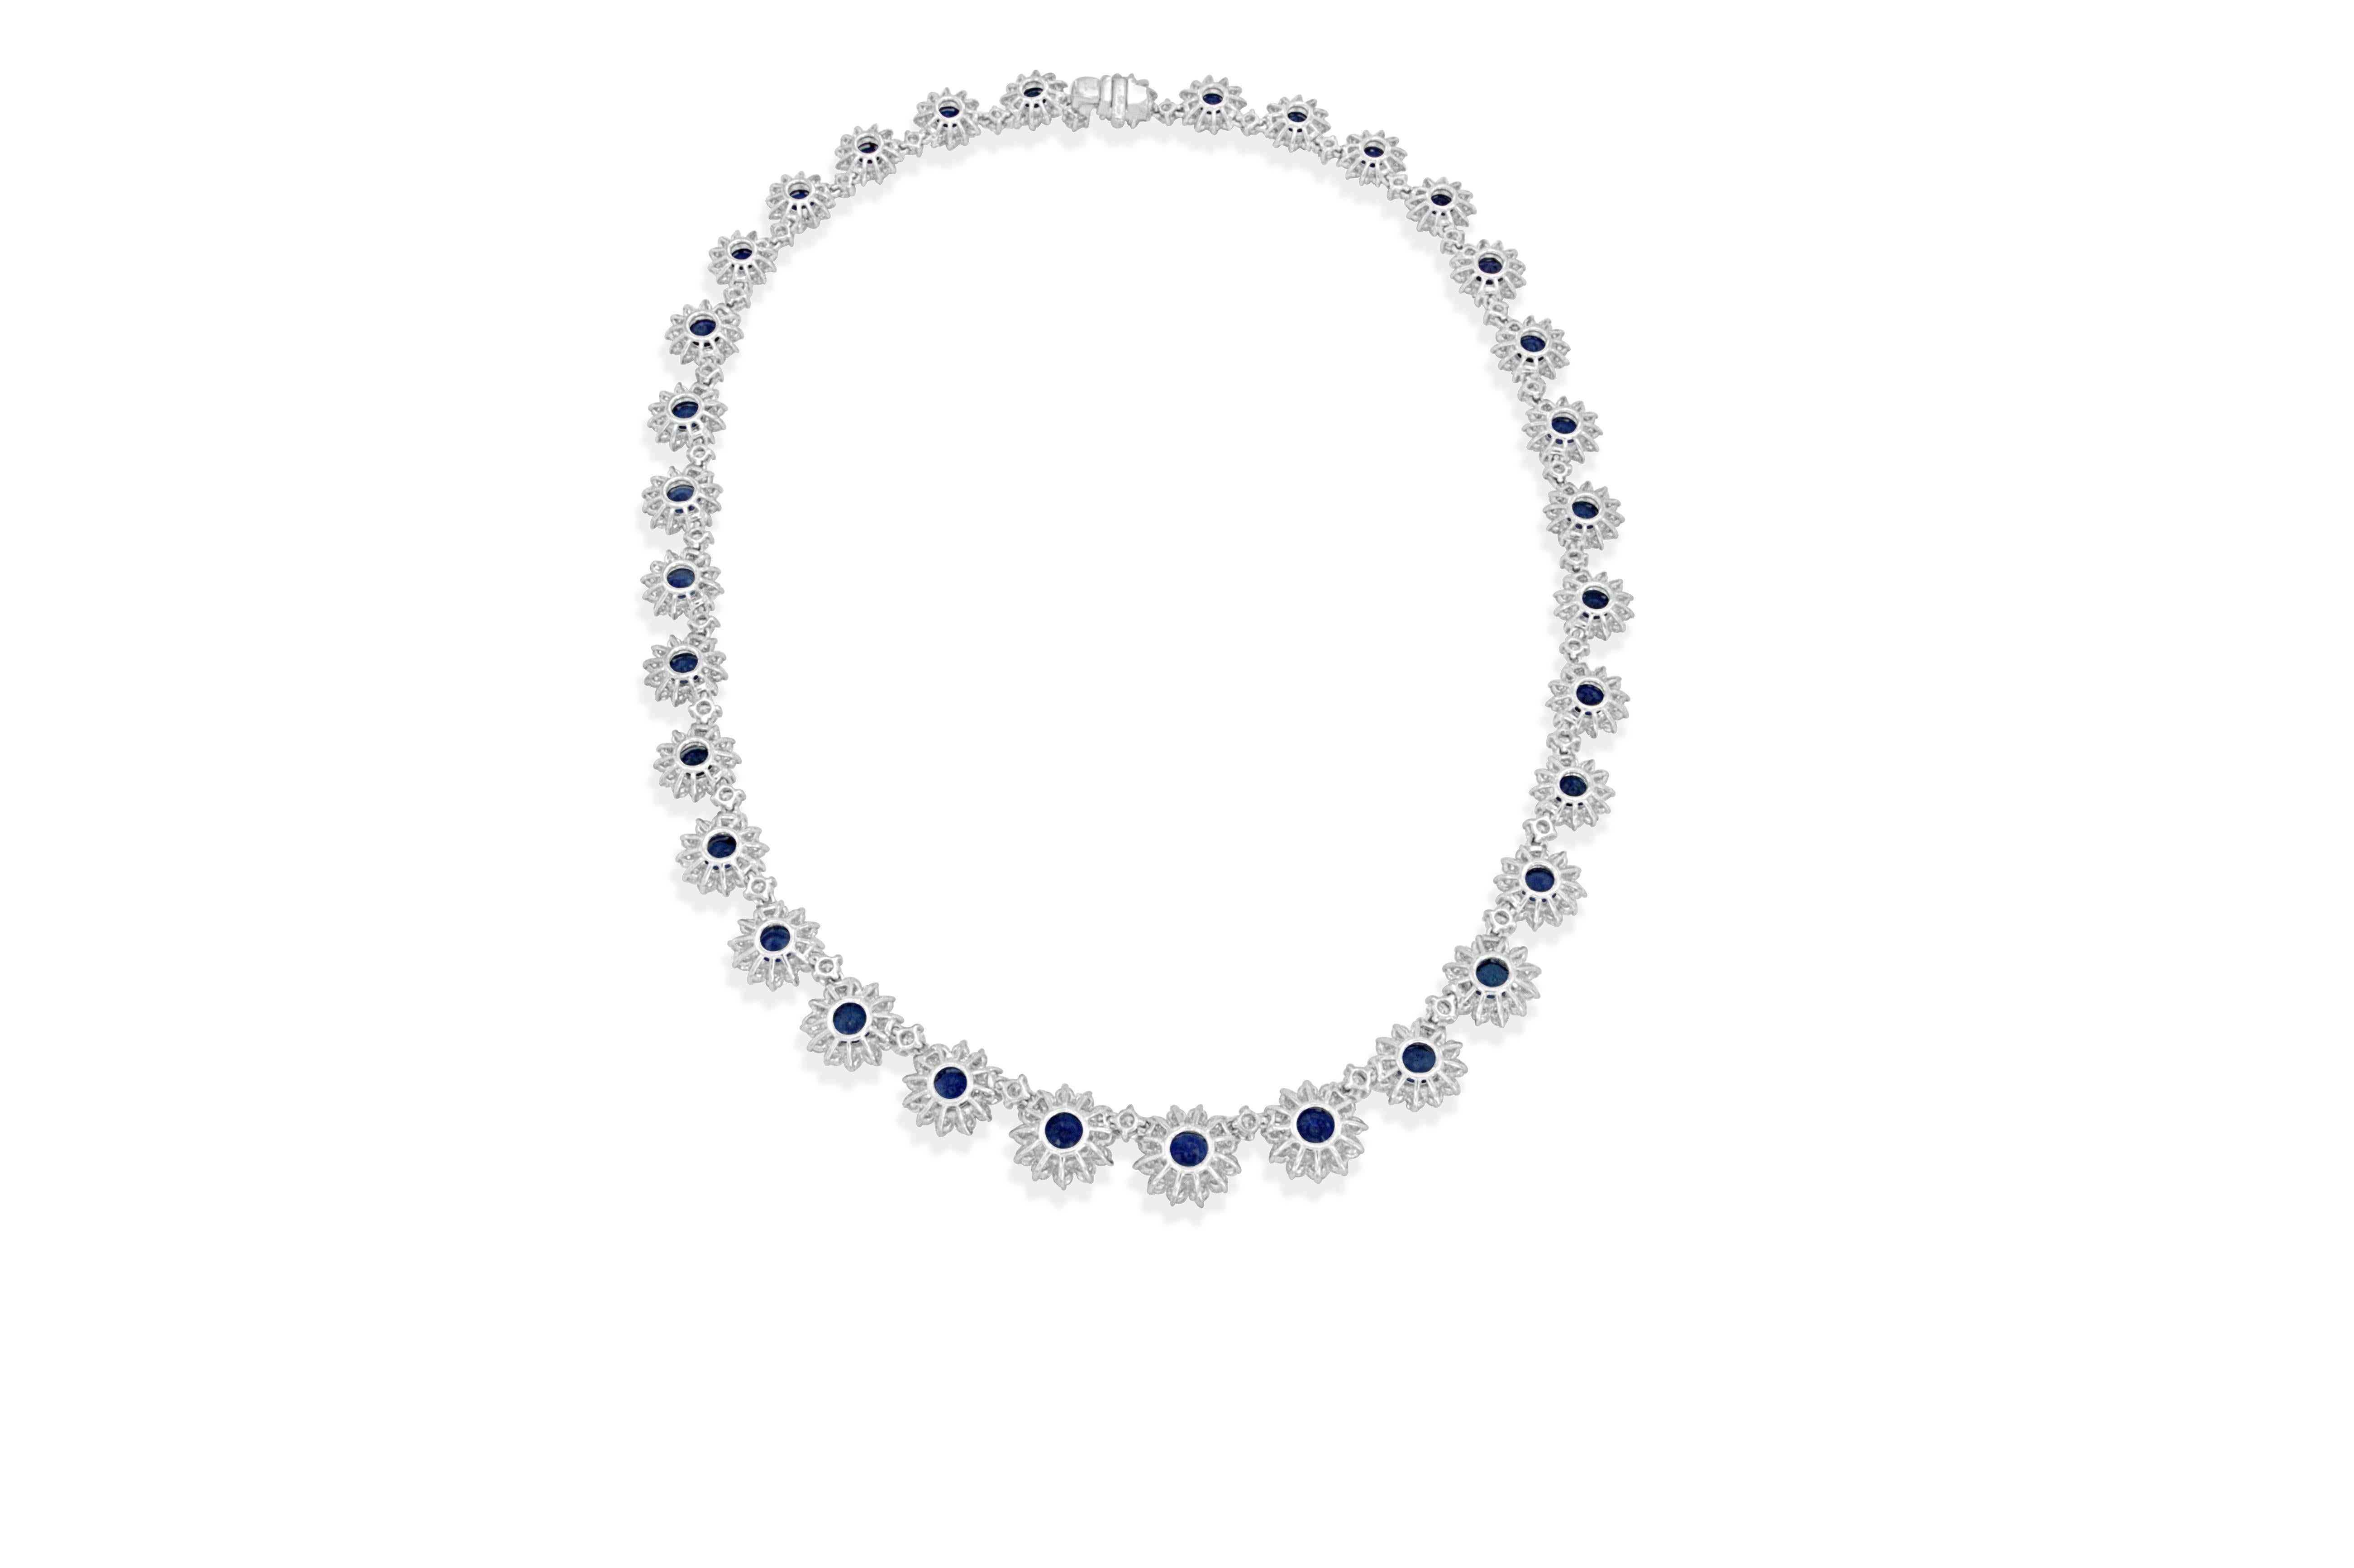 This elegant 18 karat white gold necklace features 33-round cut sapphires, total carat weight of 26.54cts, having exceptional cut and color. Each sapphire adorned with a diamond halo.  The 429-round brilliant cut diamonds have a total carat weight